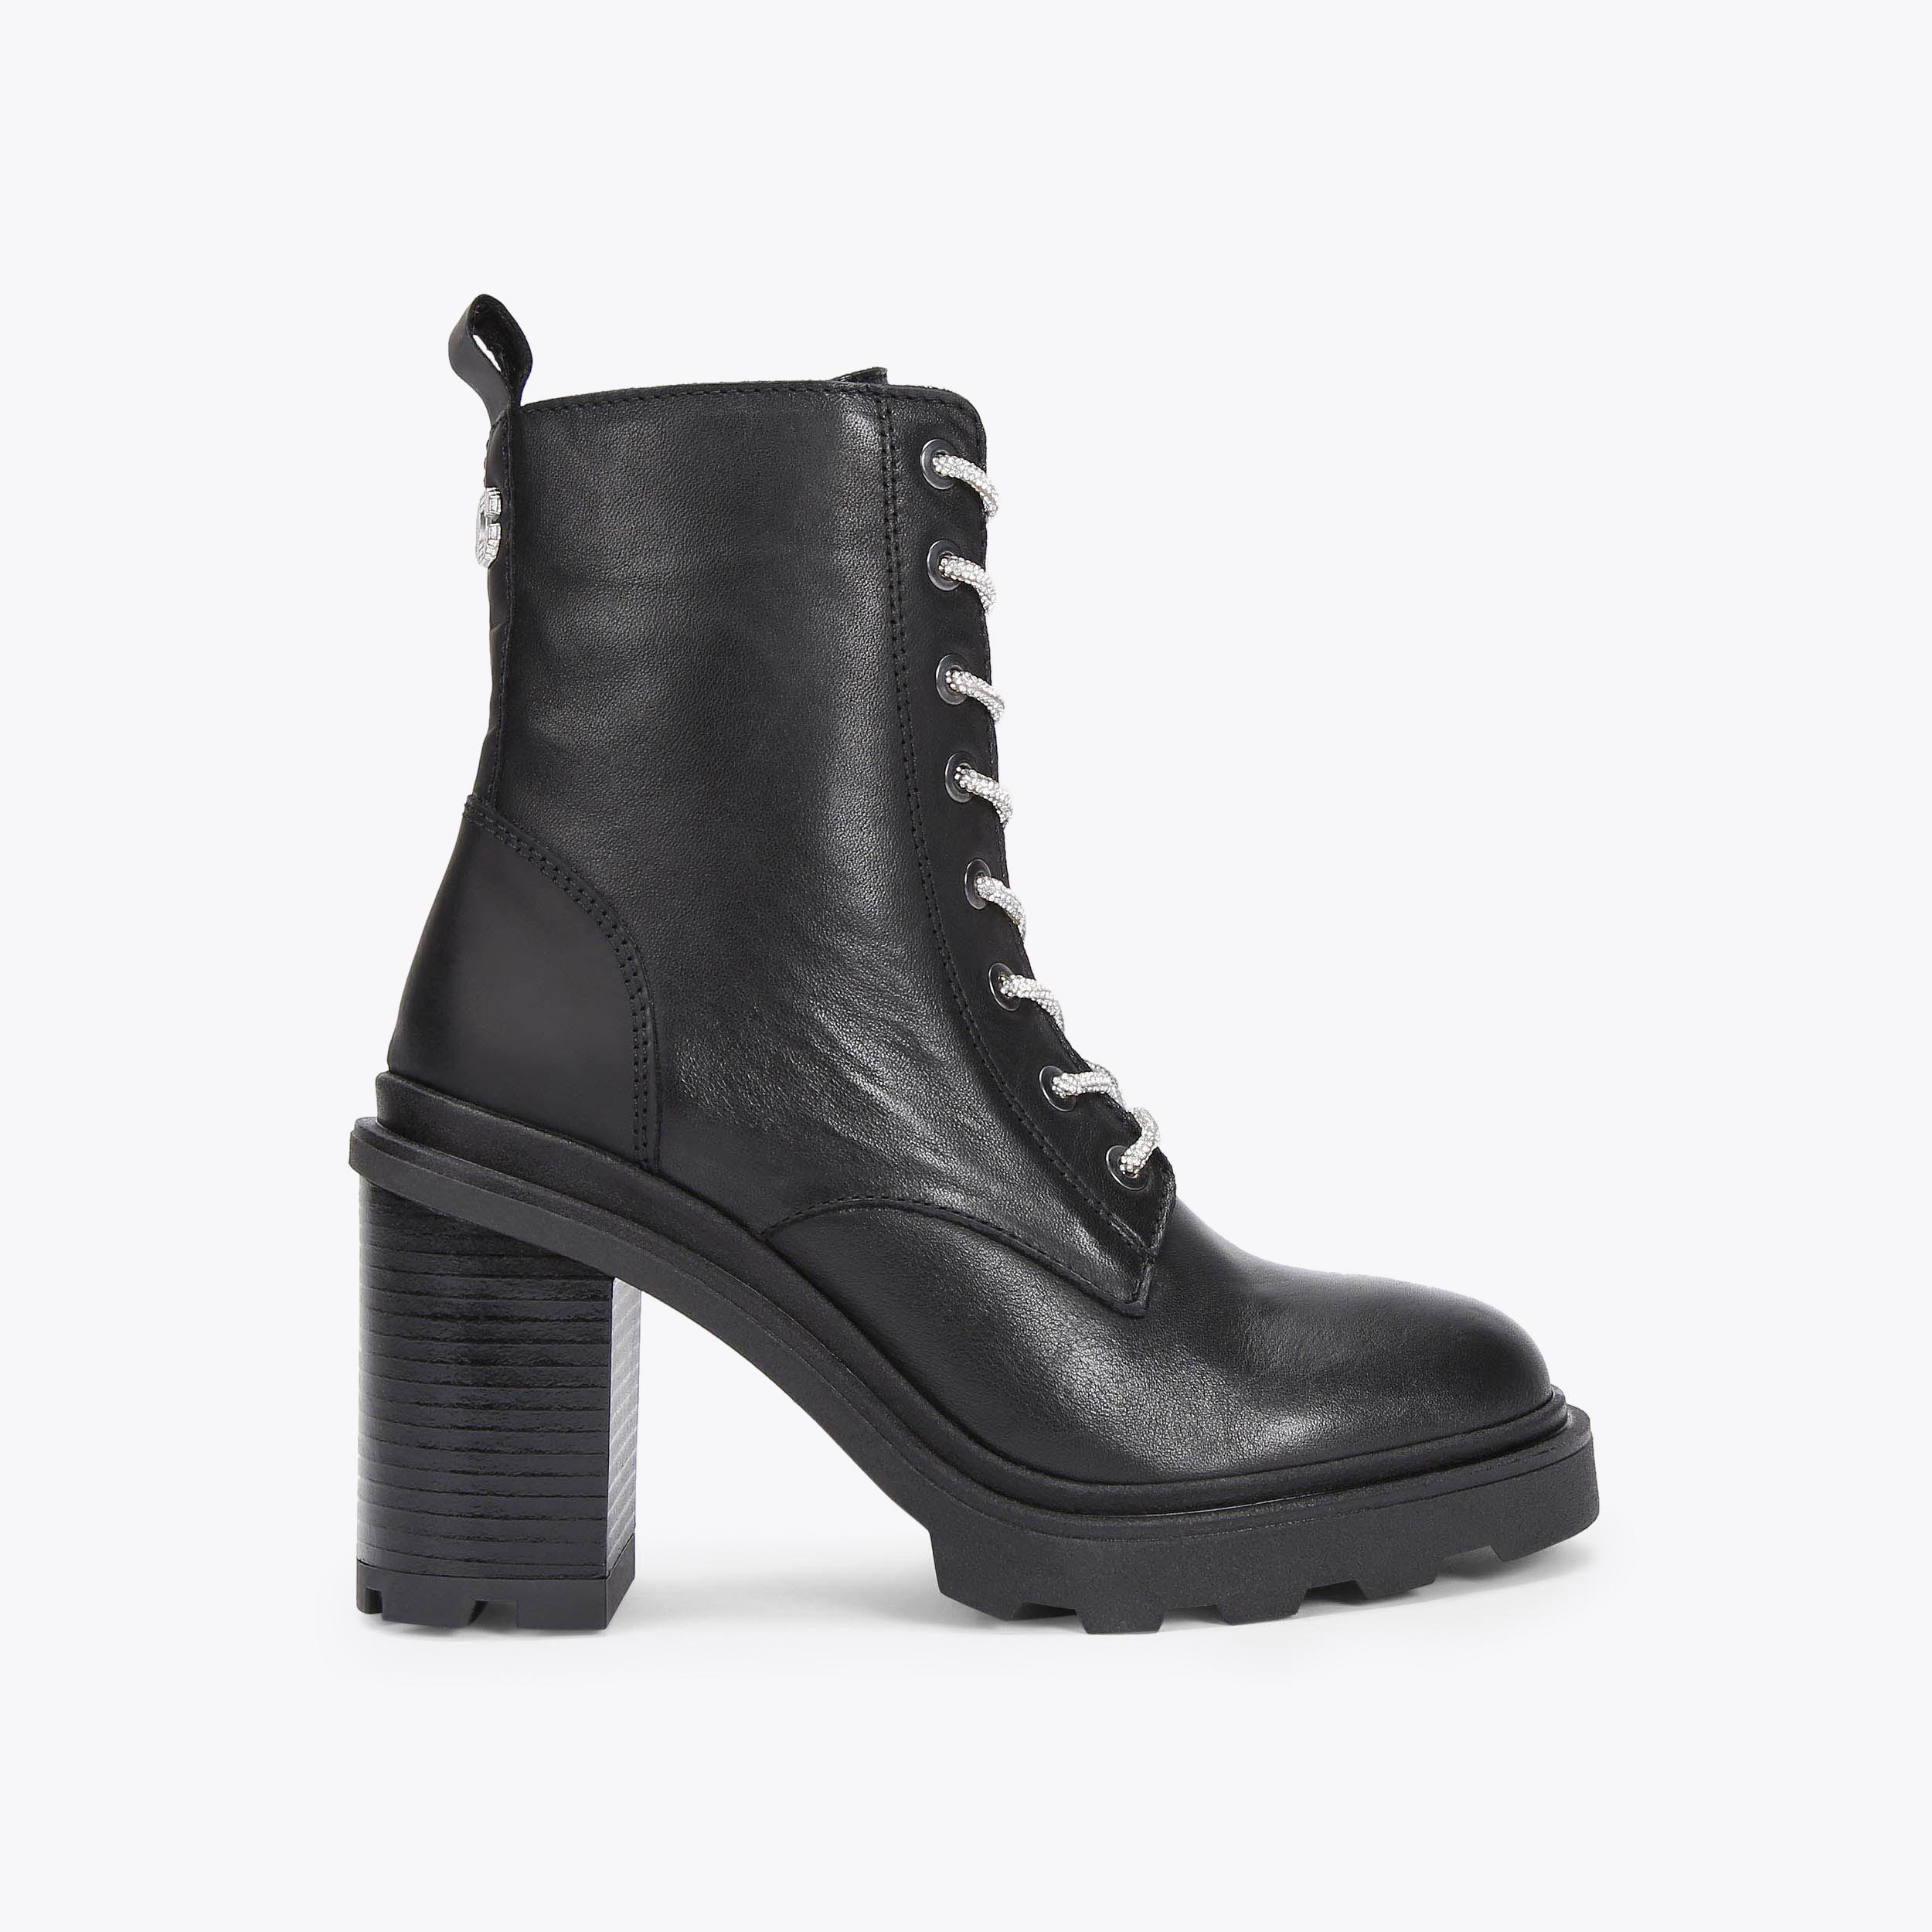 INFINITY Black Leather Heeled Ankle Boot by CARVELA